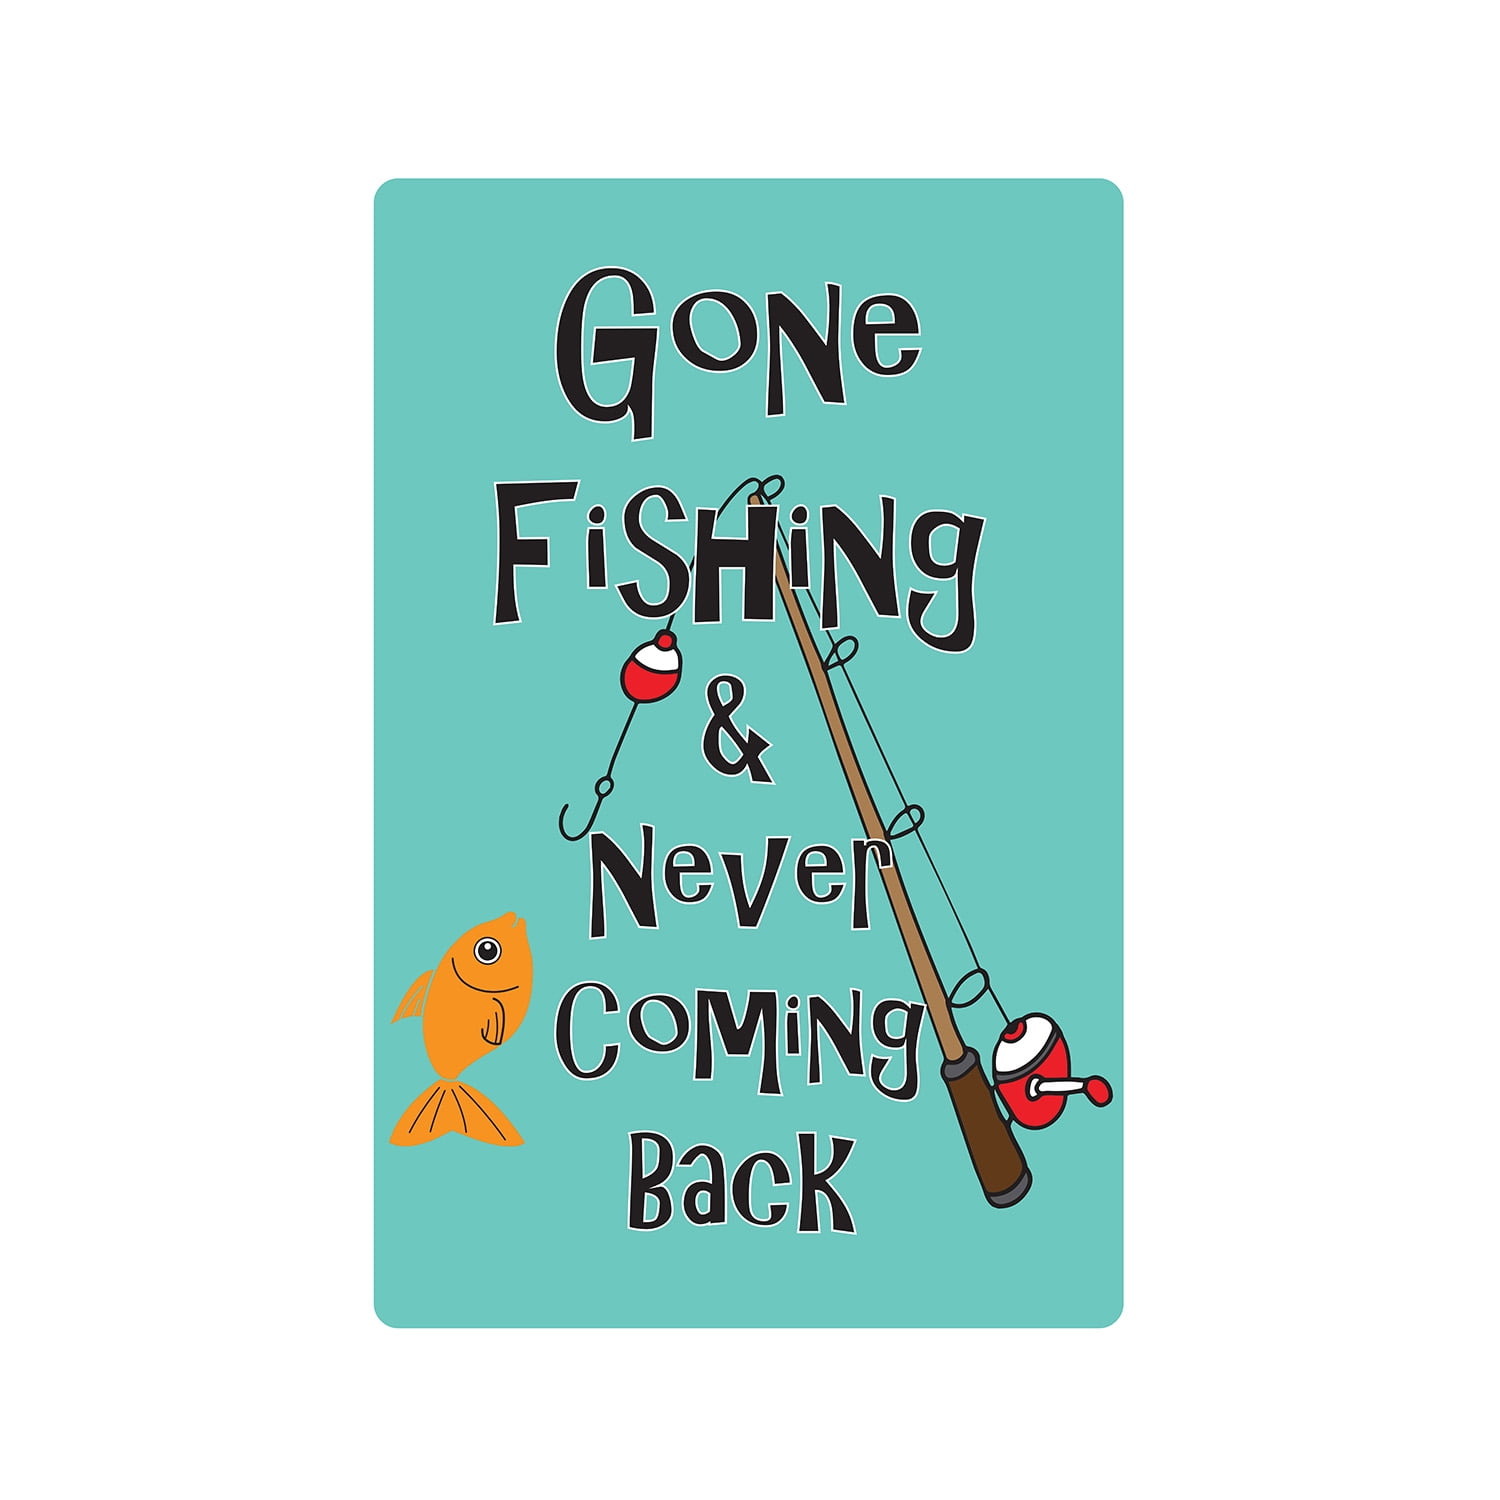 GONE FISHING & NEVER COMING BACK Decal sport fishing relax water